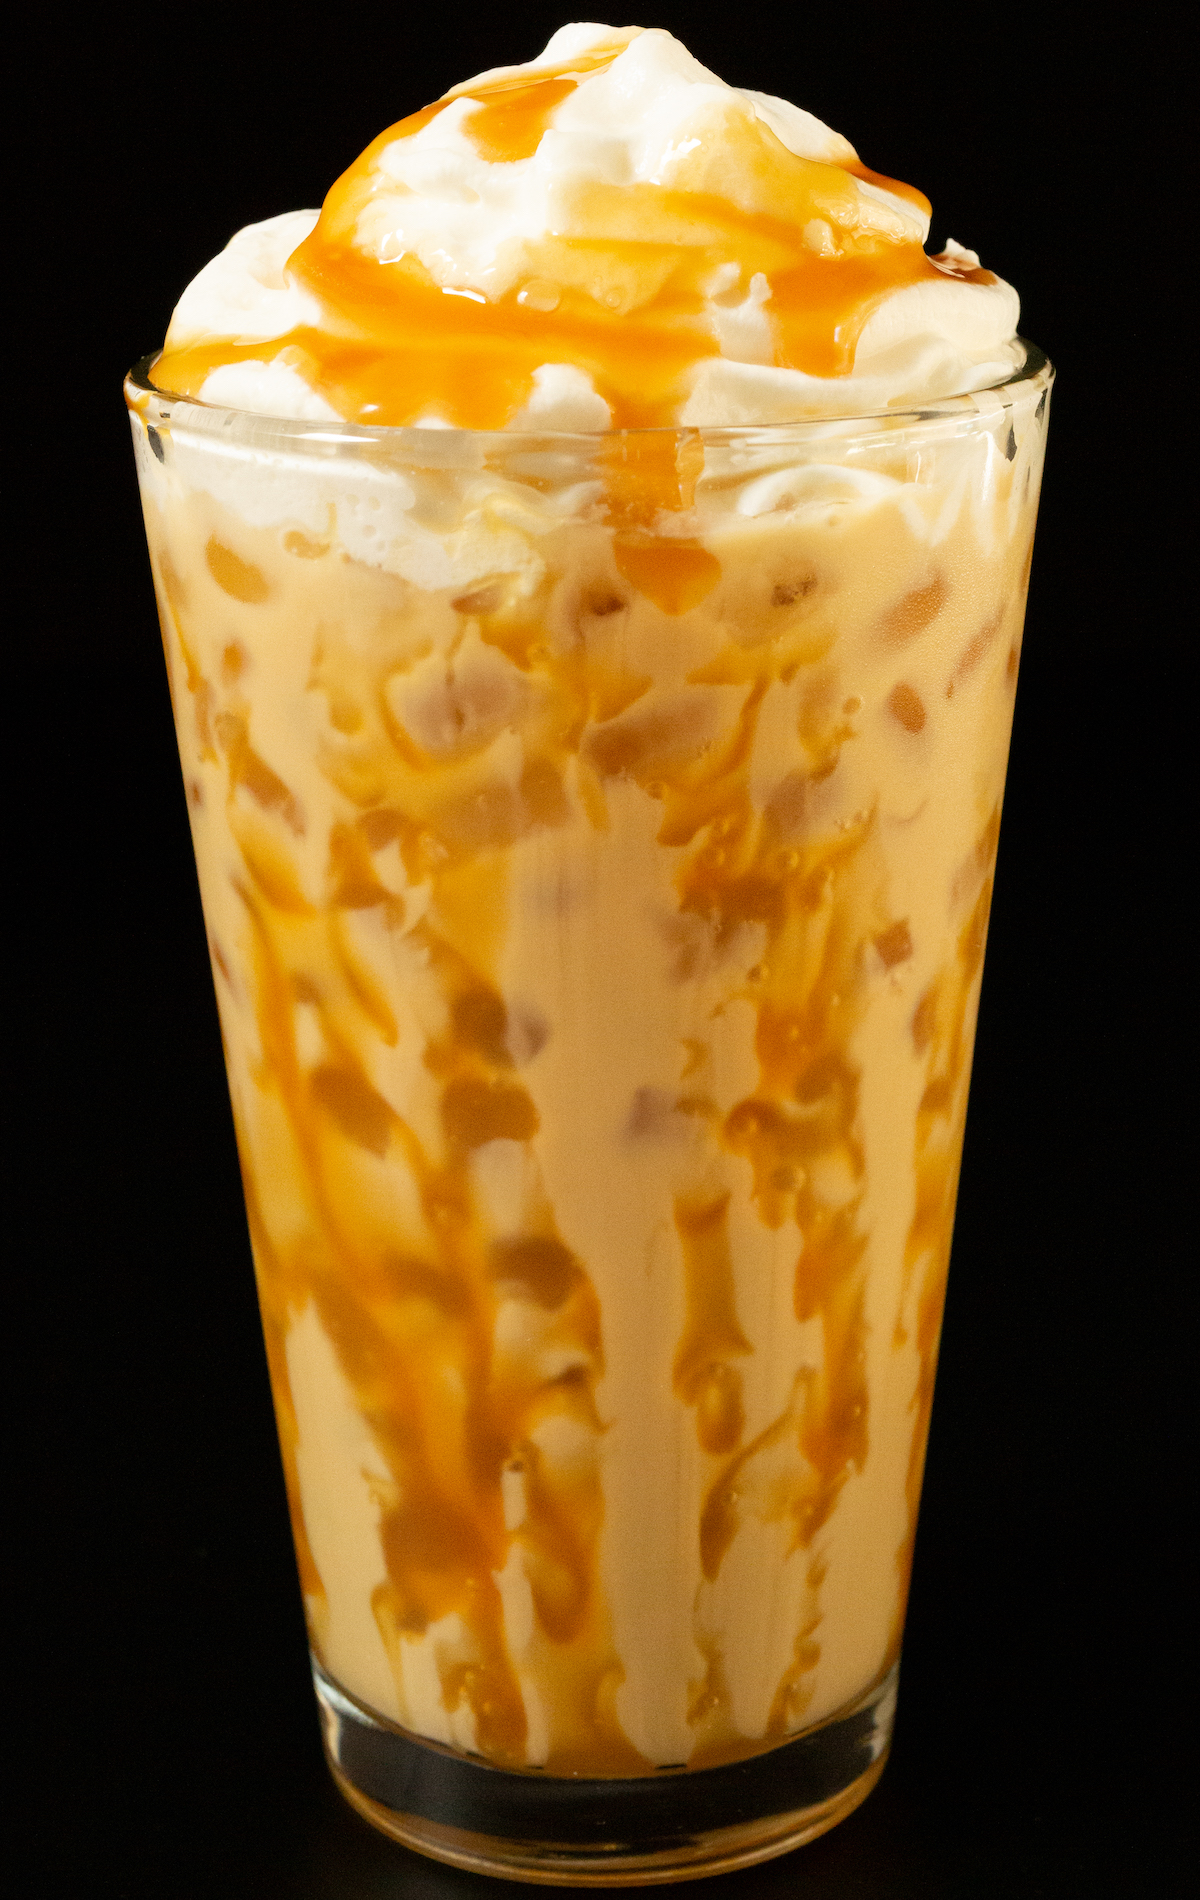 A pint glass has caramel dizzled all around the inside and is filled with a light brown butterbeer latte topped with whipped cream and caramel.